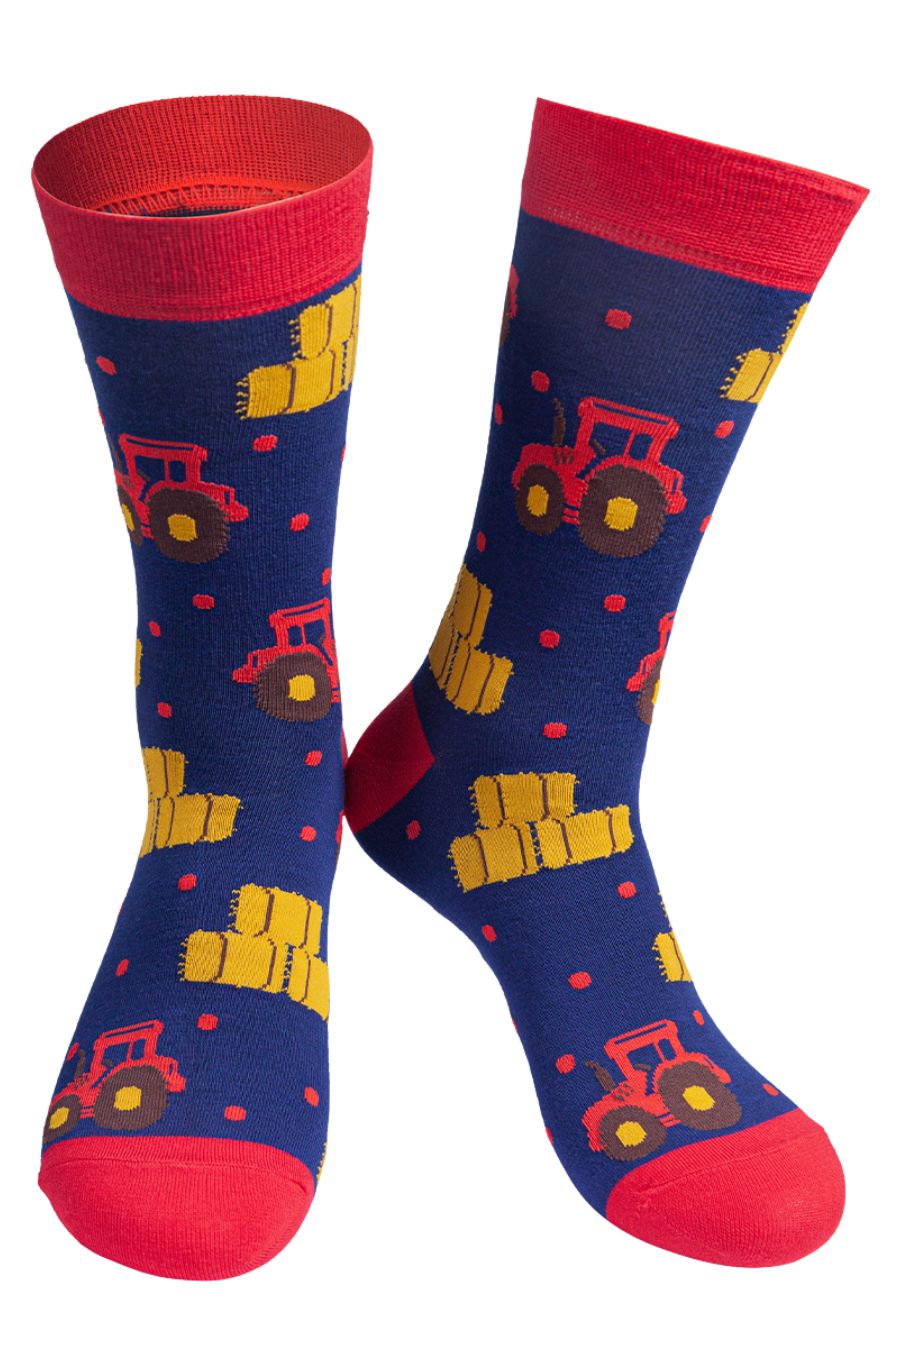 navy blue socks with red heel, toe and trim with an all over pattern of red tractors and bales of hay